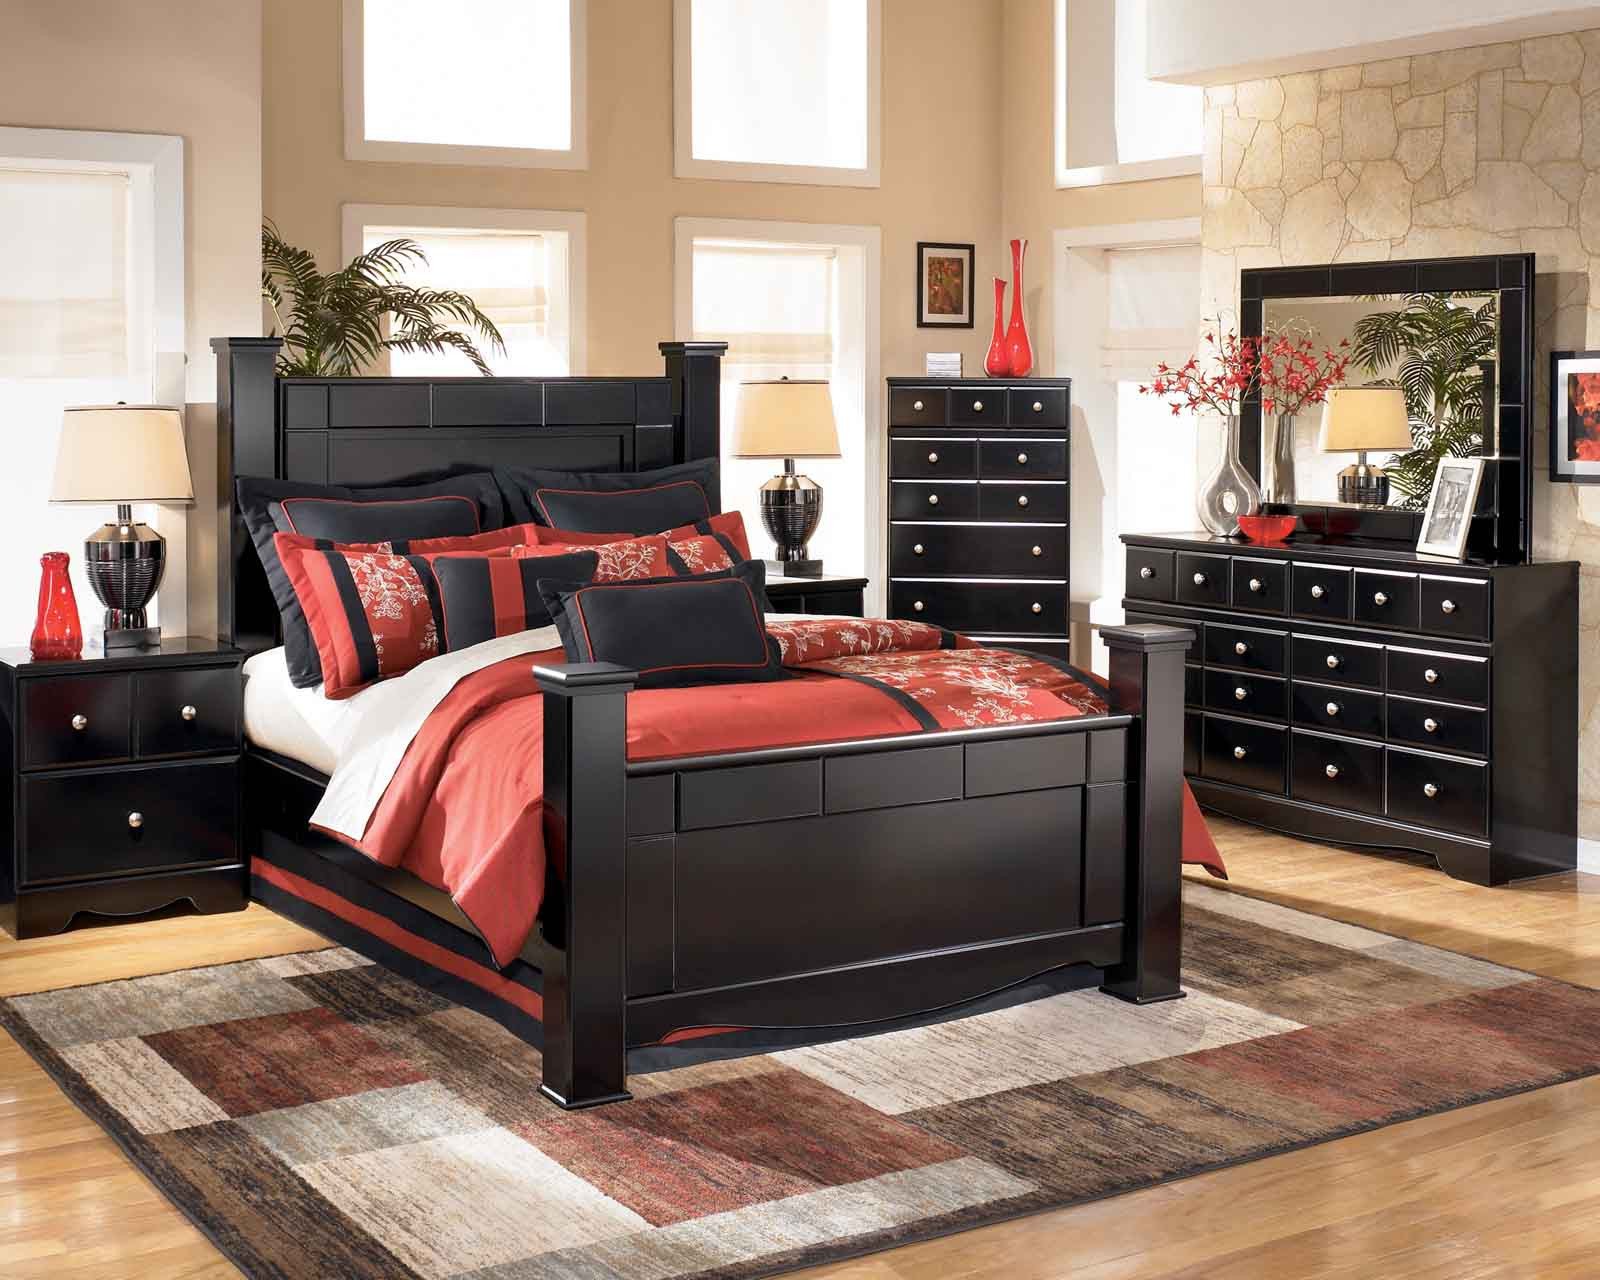 Rooms to Go King Bedroom Set Awesome Shay Poster Bedroom Set In Black